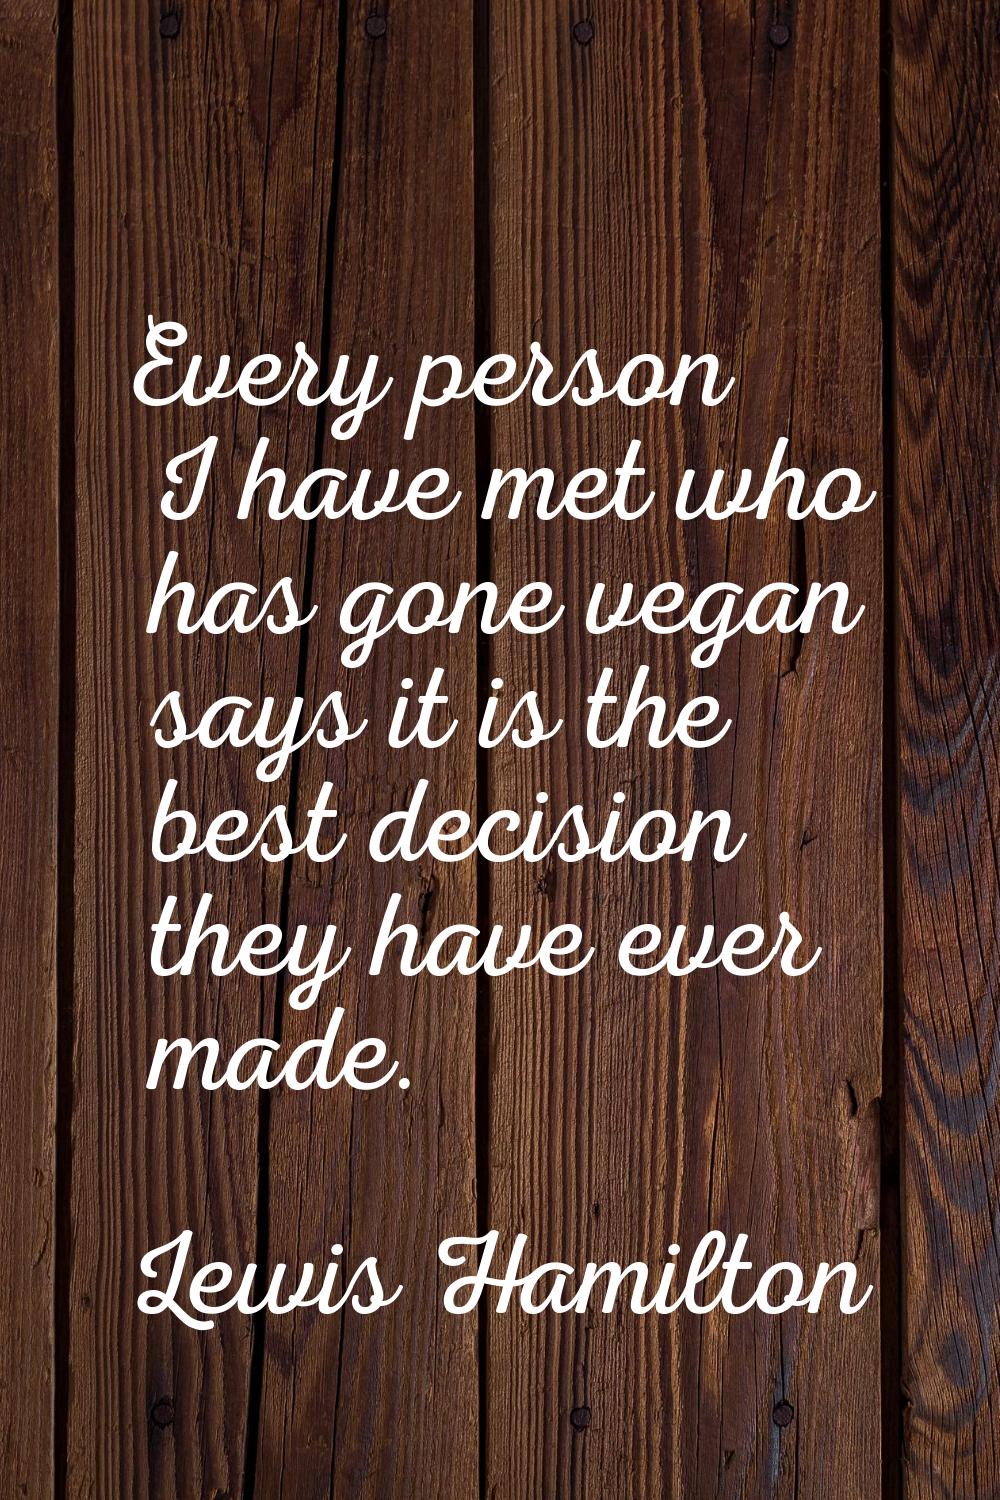 Every person I have met who has gone vegan says it is the best decision they have ever made.